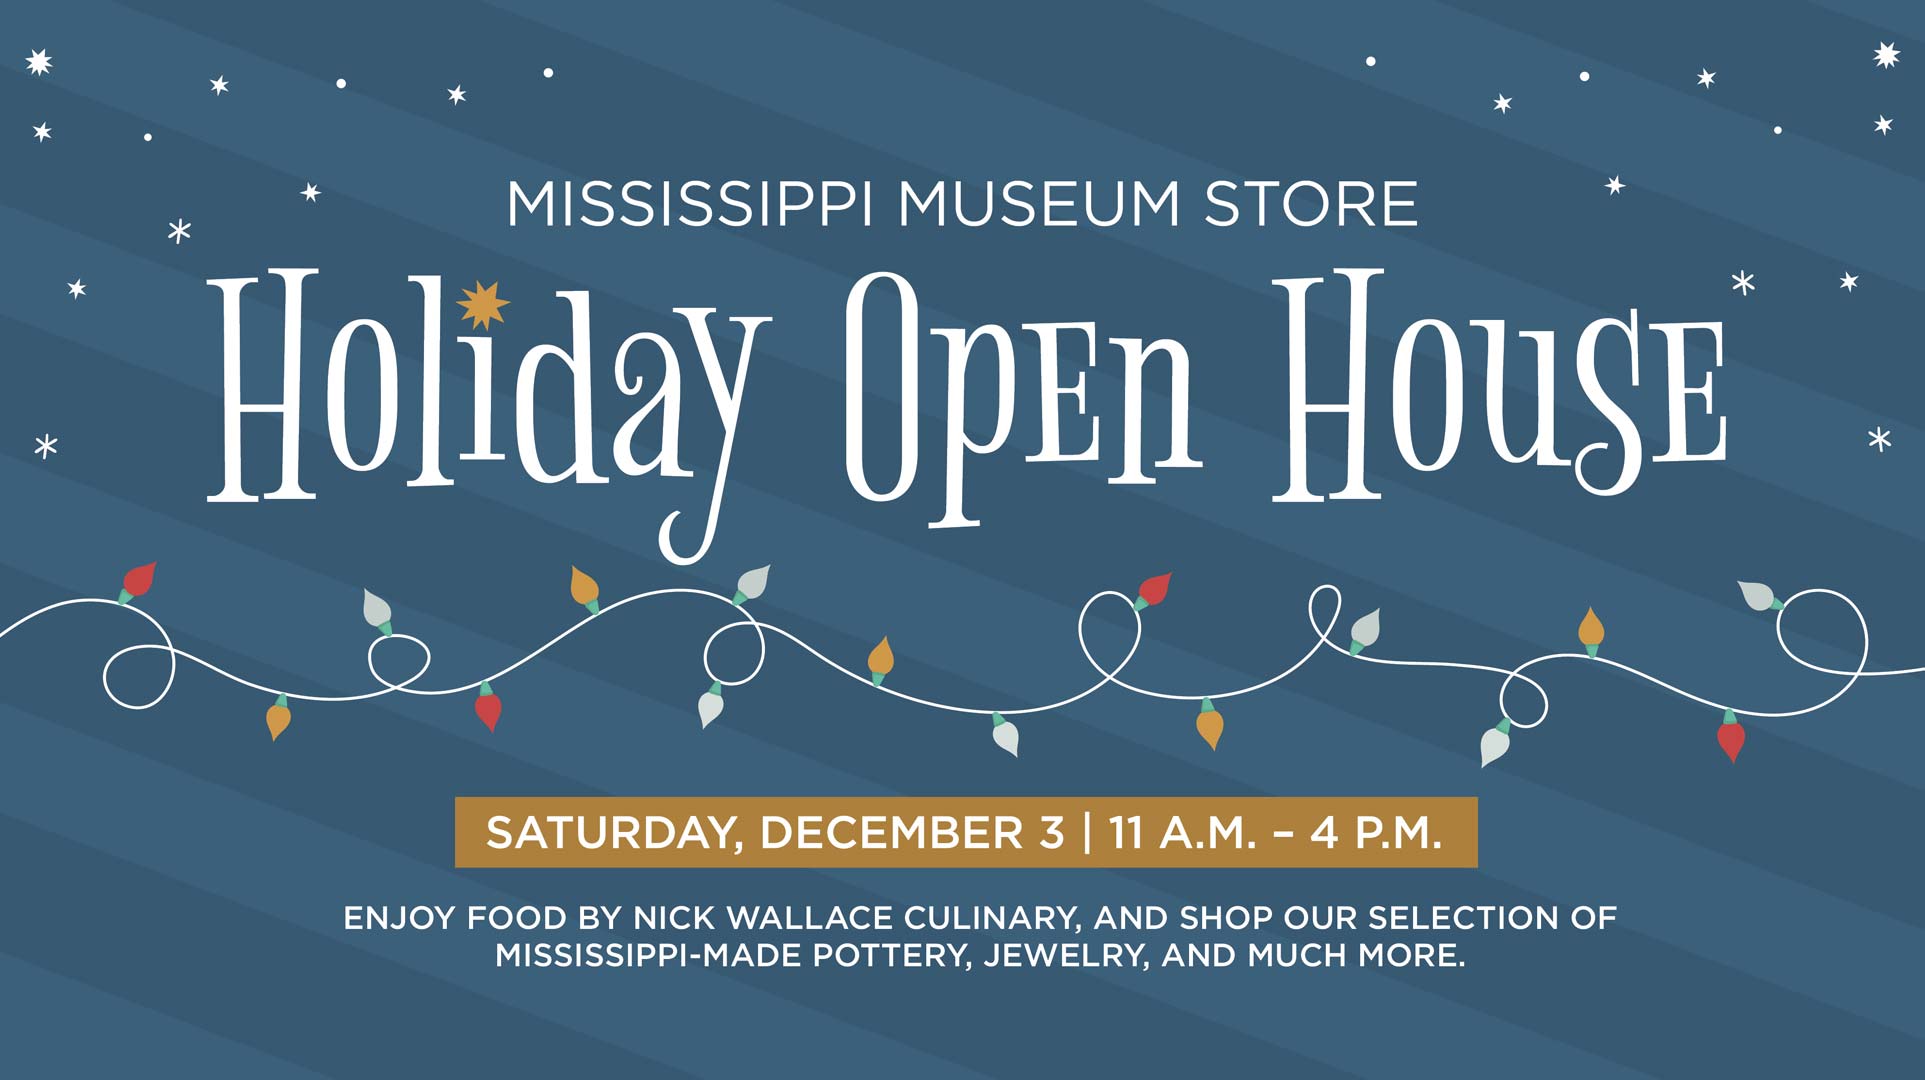 Mississippi Museum Store Holiday Open House